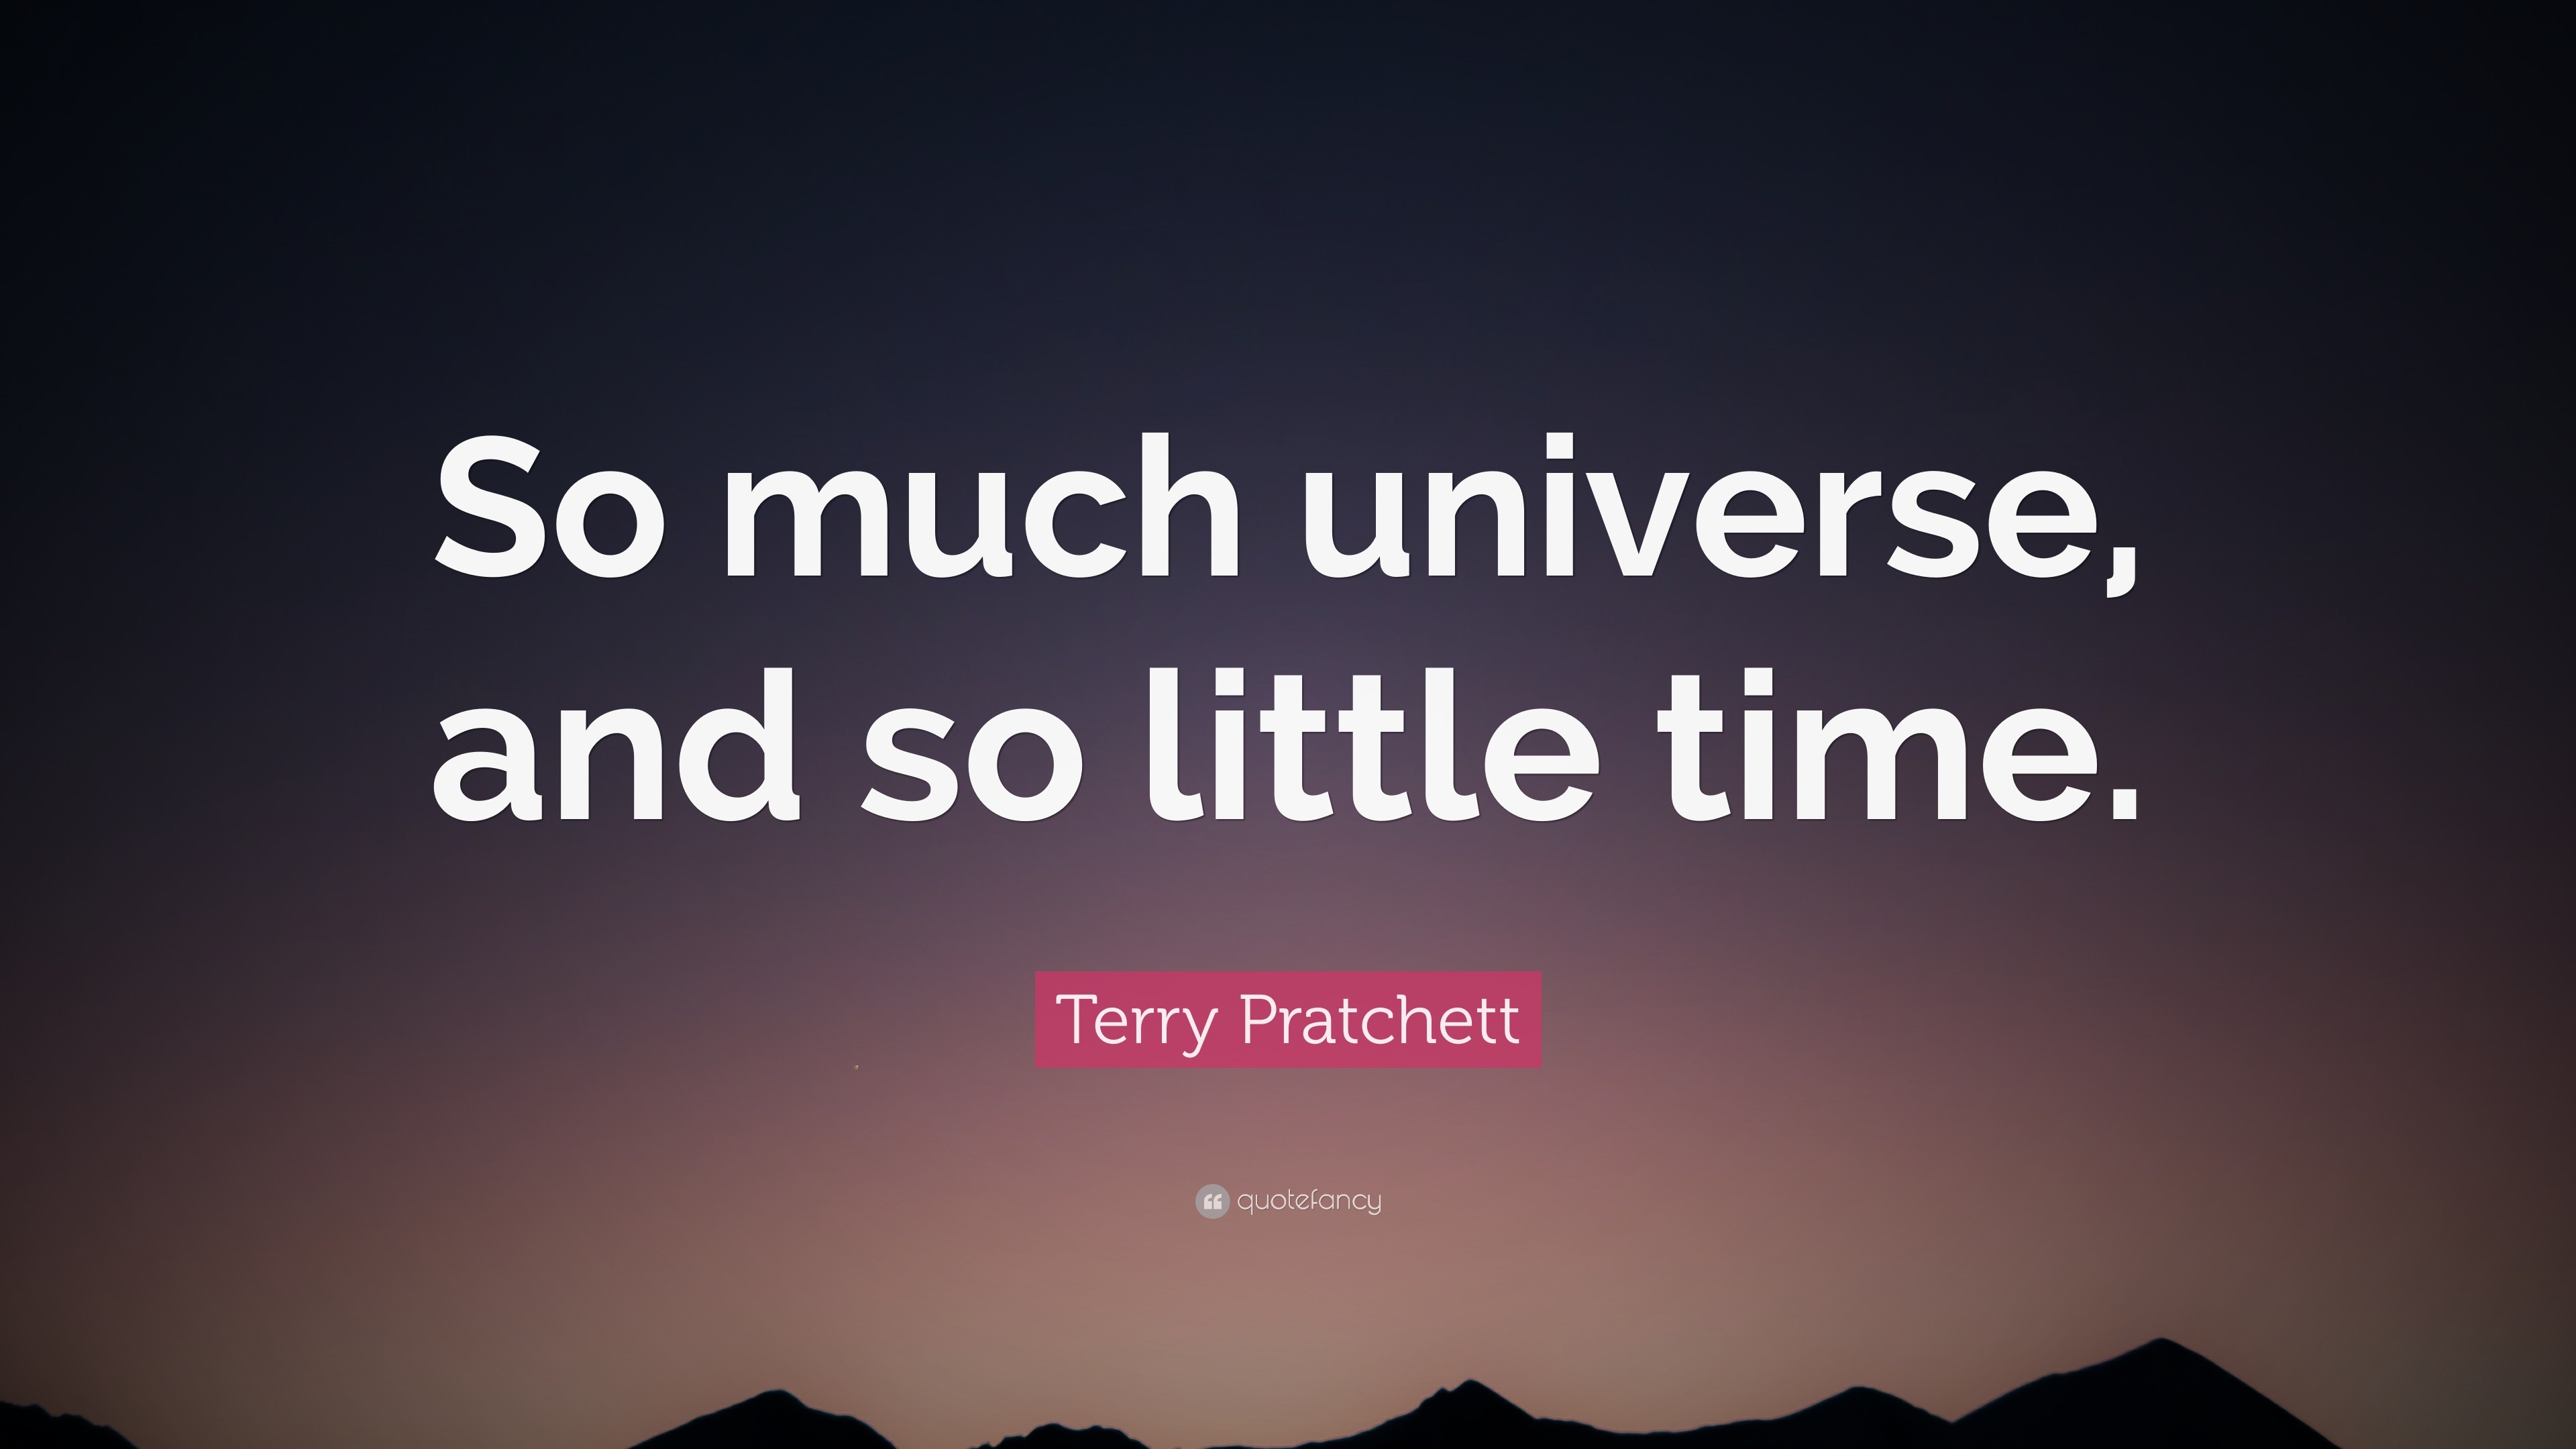 Terry Pratchett Quote: “So much universe, and so little time.”